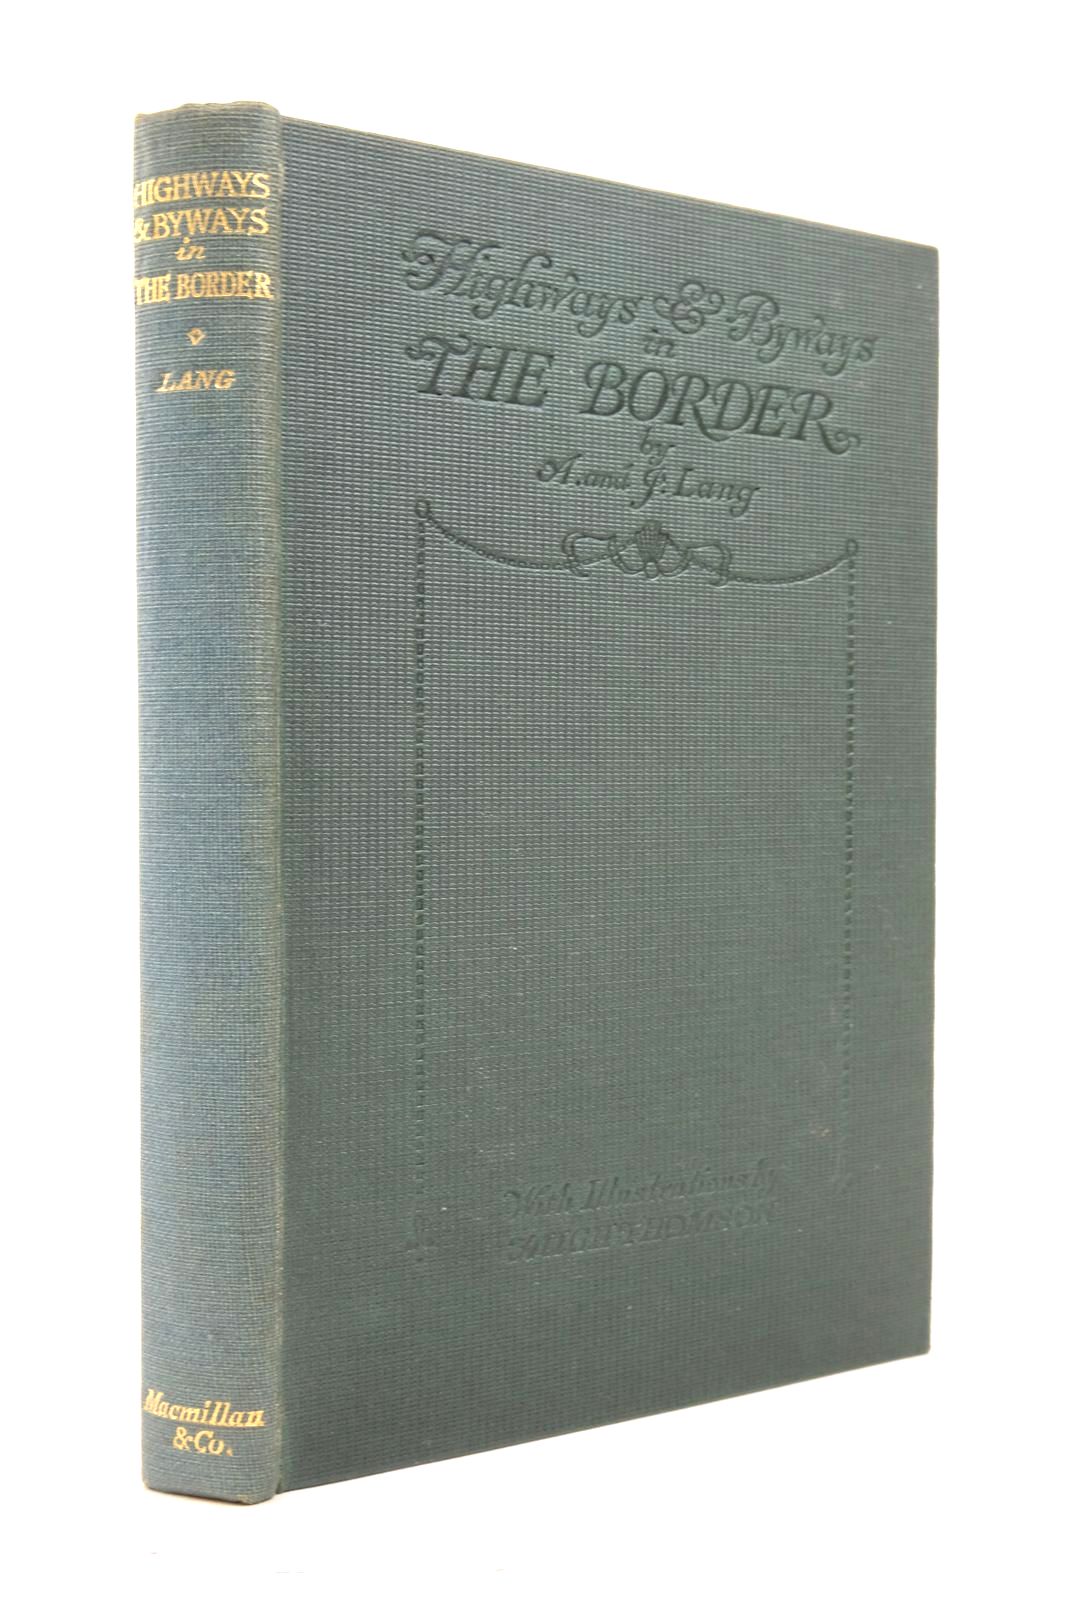 Photo of HIGHWAYS AND BYWAYS IN THE BORDER written by Lang, Andrew Lang, John illustrated by Thomson, Hugh published by Macmillan &amp; Co. Ltd. (STOCK CODE: 2137610)  for sale by Stella & Rose's Books